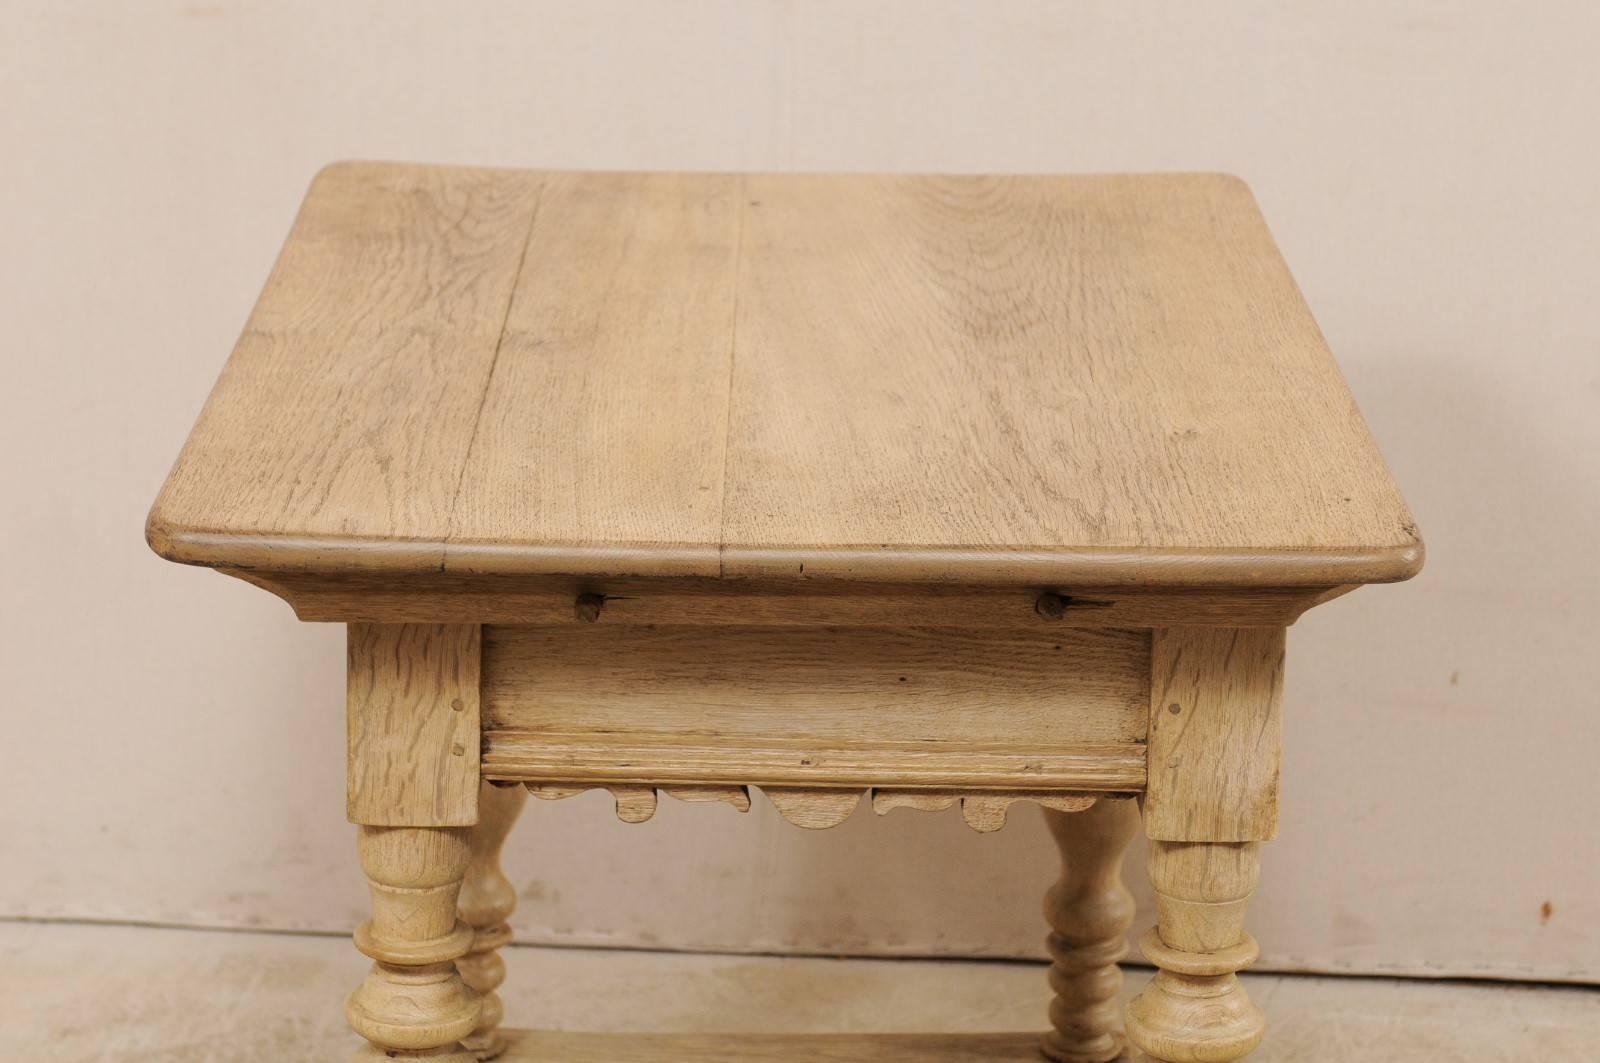 18th Century and Earlier 18th Century Swedish Period Baroque Wood Side Table with Drawer on Turned Legs